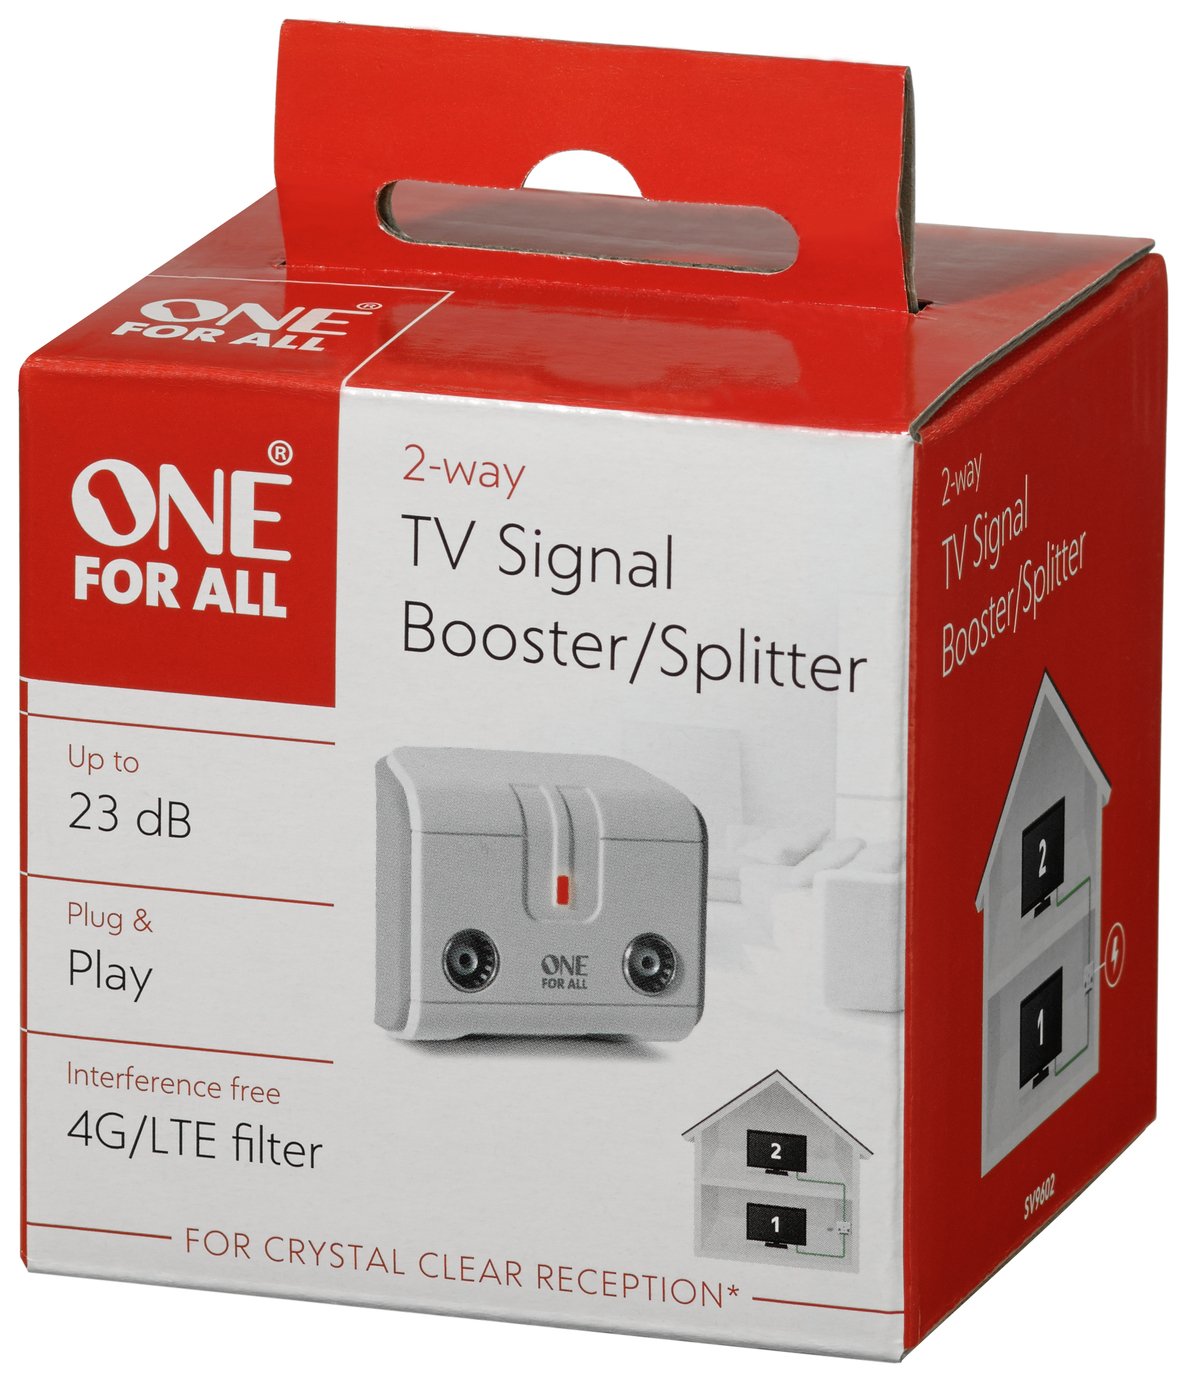 One For All SV9602 2 Way TV Signal Booster Review